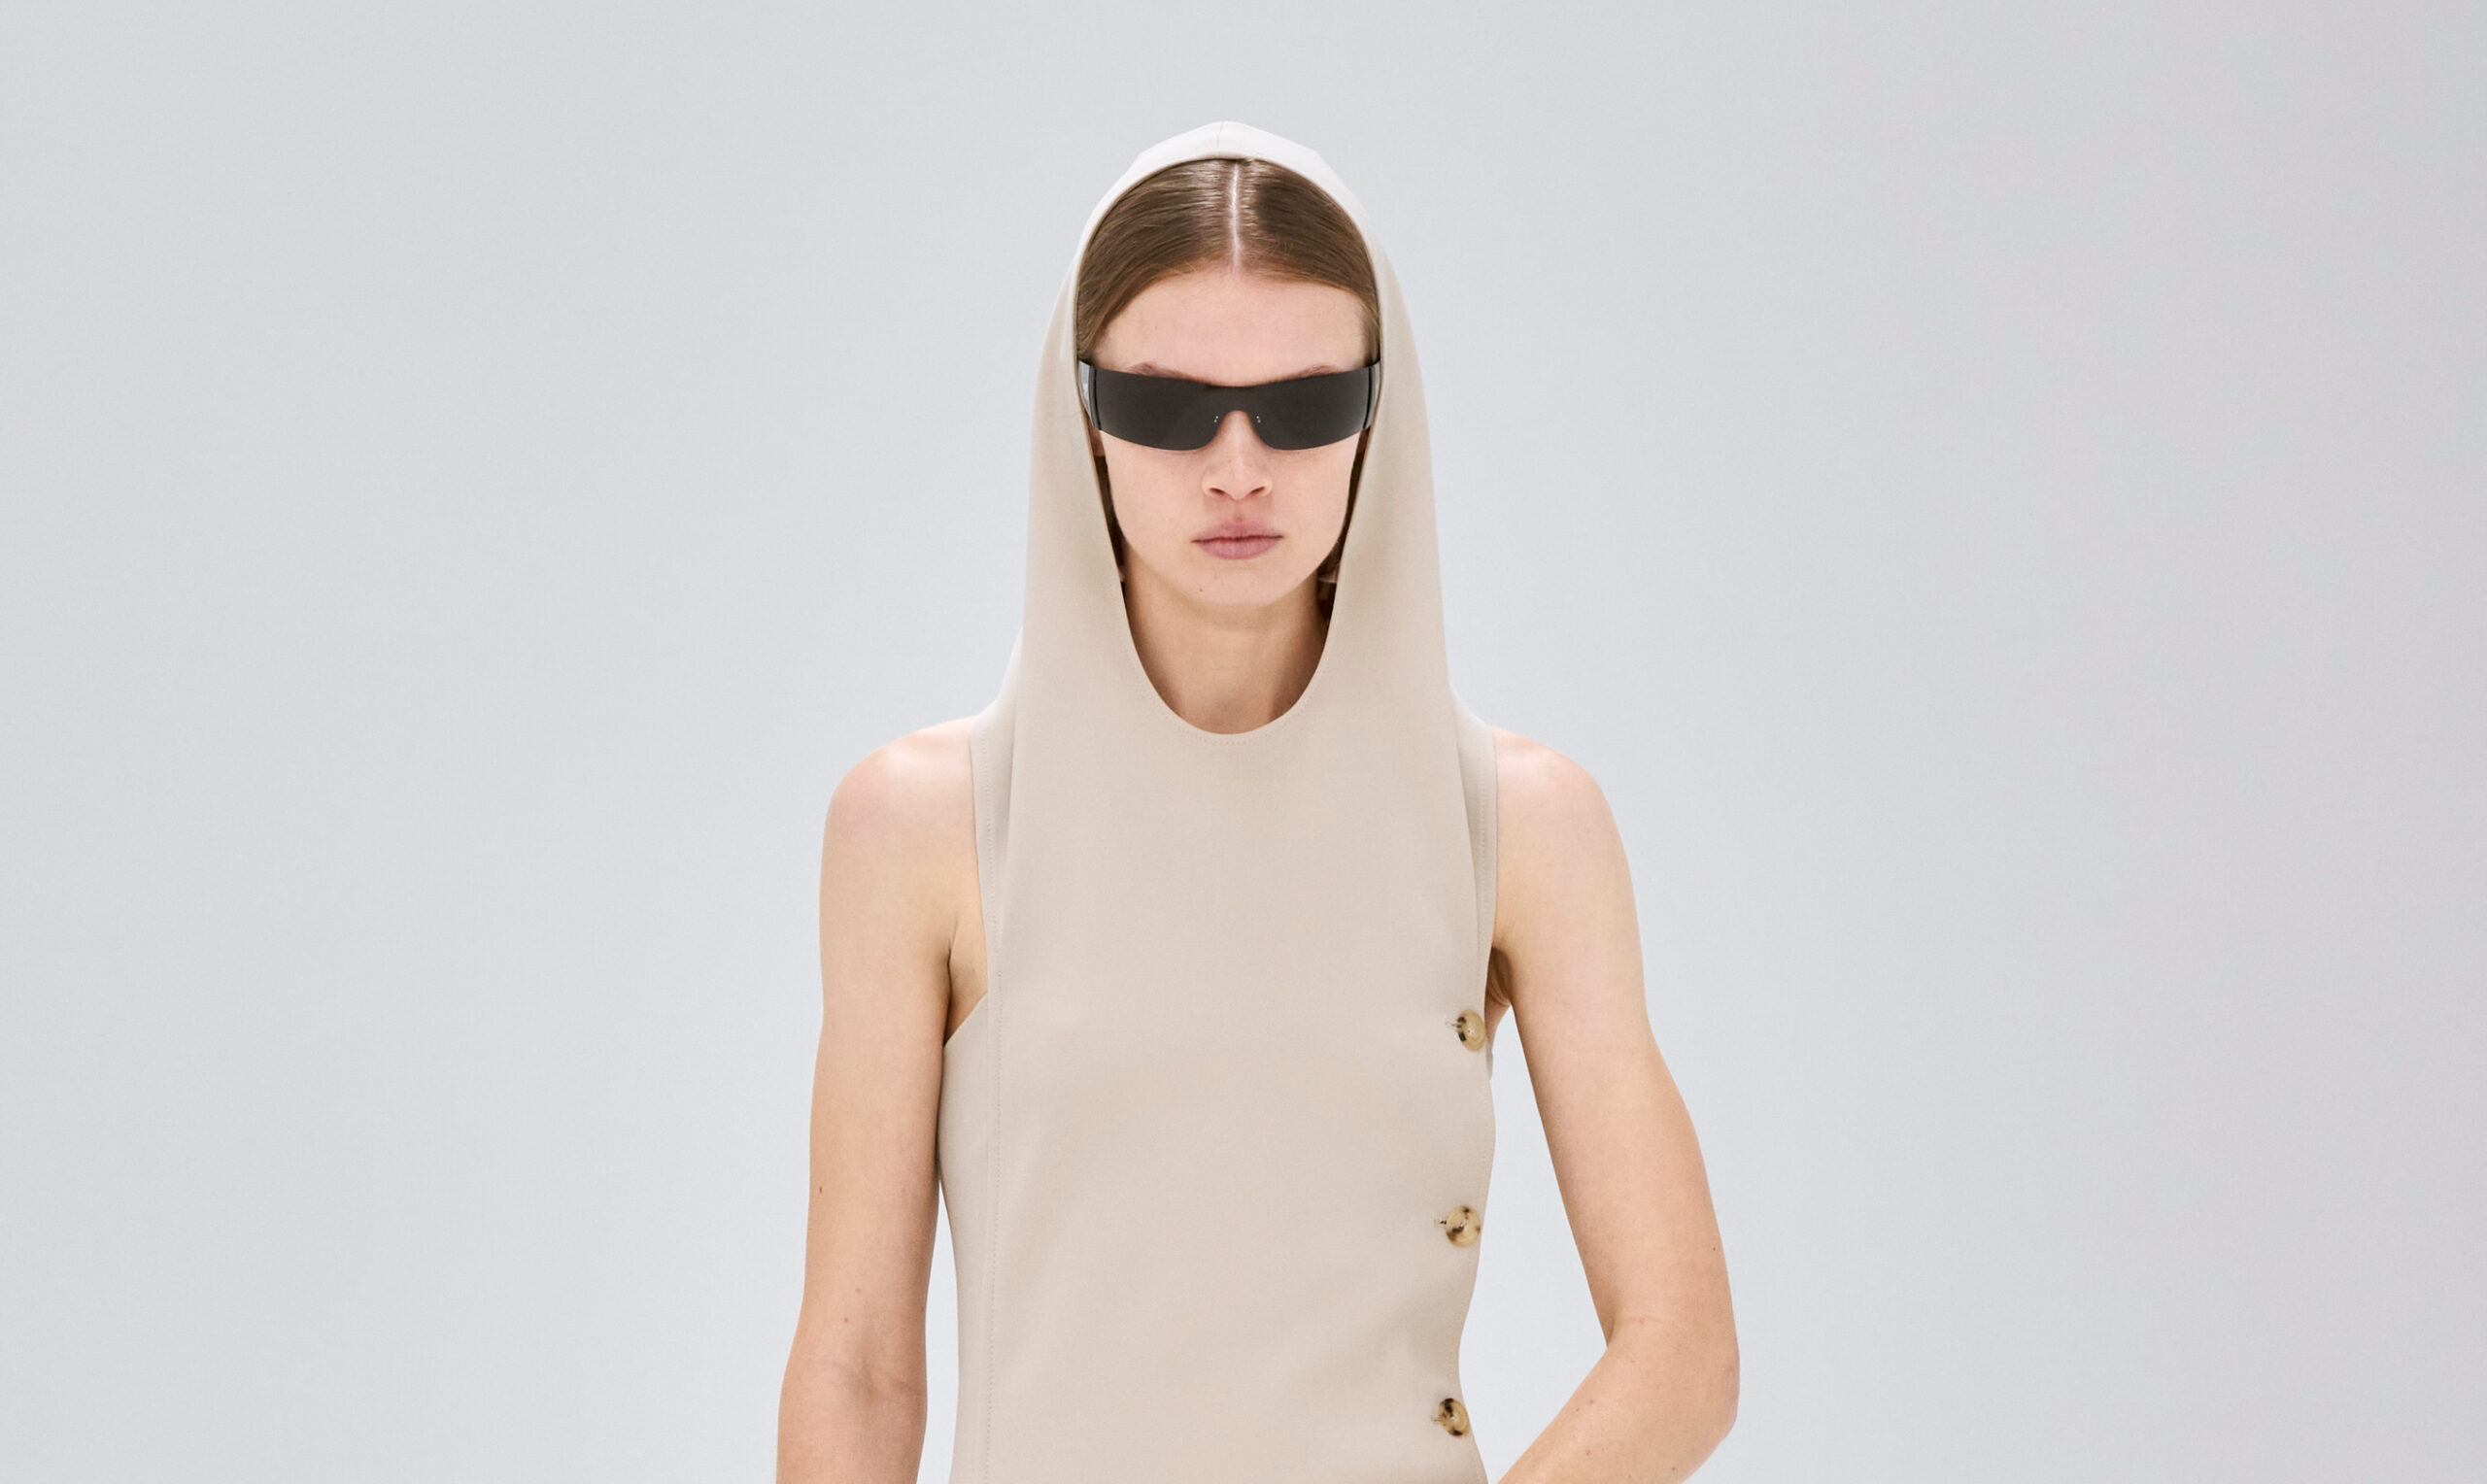 A model from the Courrèges Fall/Winter 2024 collection at Paris Fashion Week wears an asymmetric beige sleeveless top with a draped hood and side button details, paired with black wraparound sunglasses.